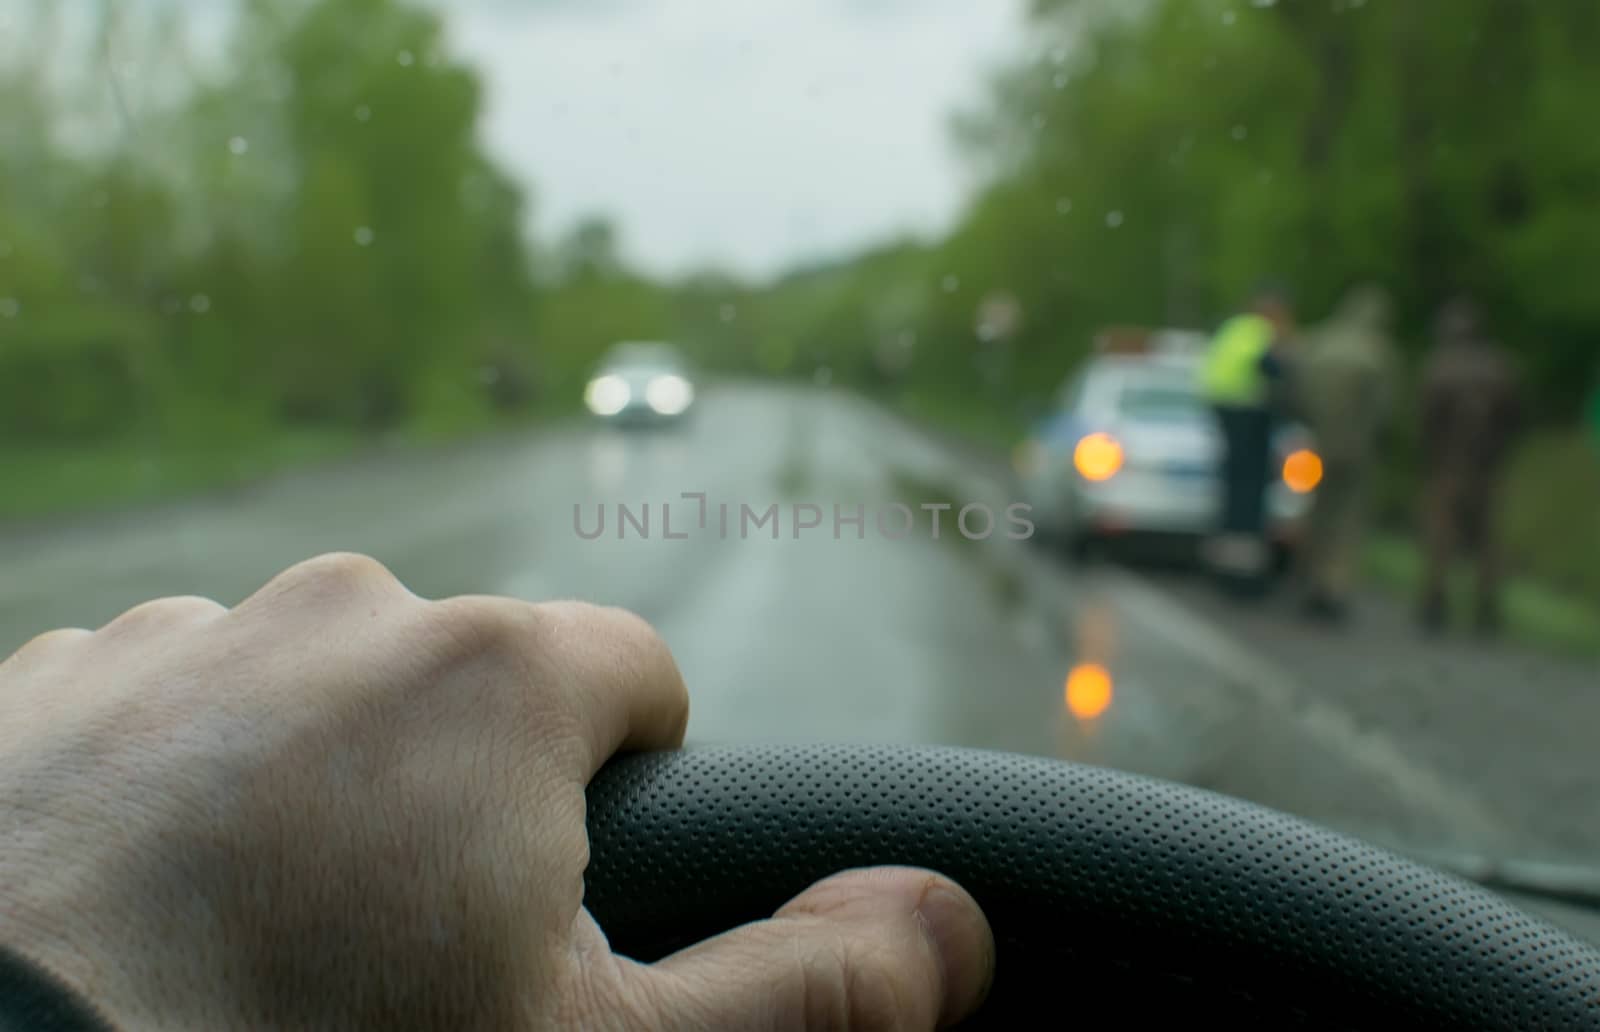 Rainy evening weather. Hand of the car driver close-up, against the background of people standing on the side of the road and a police car